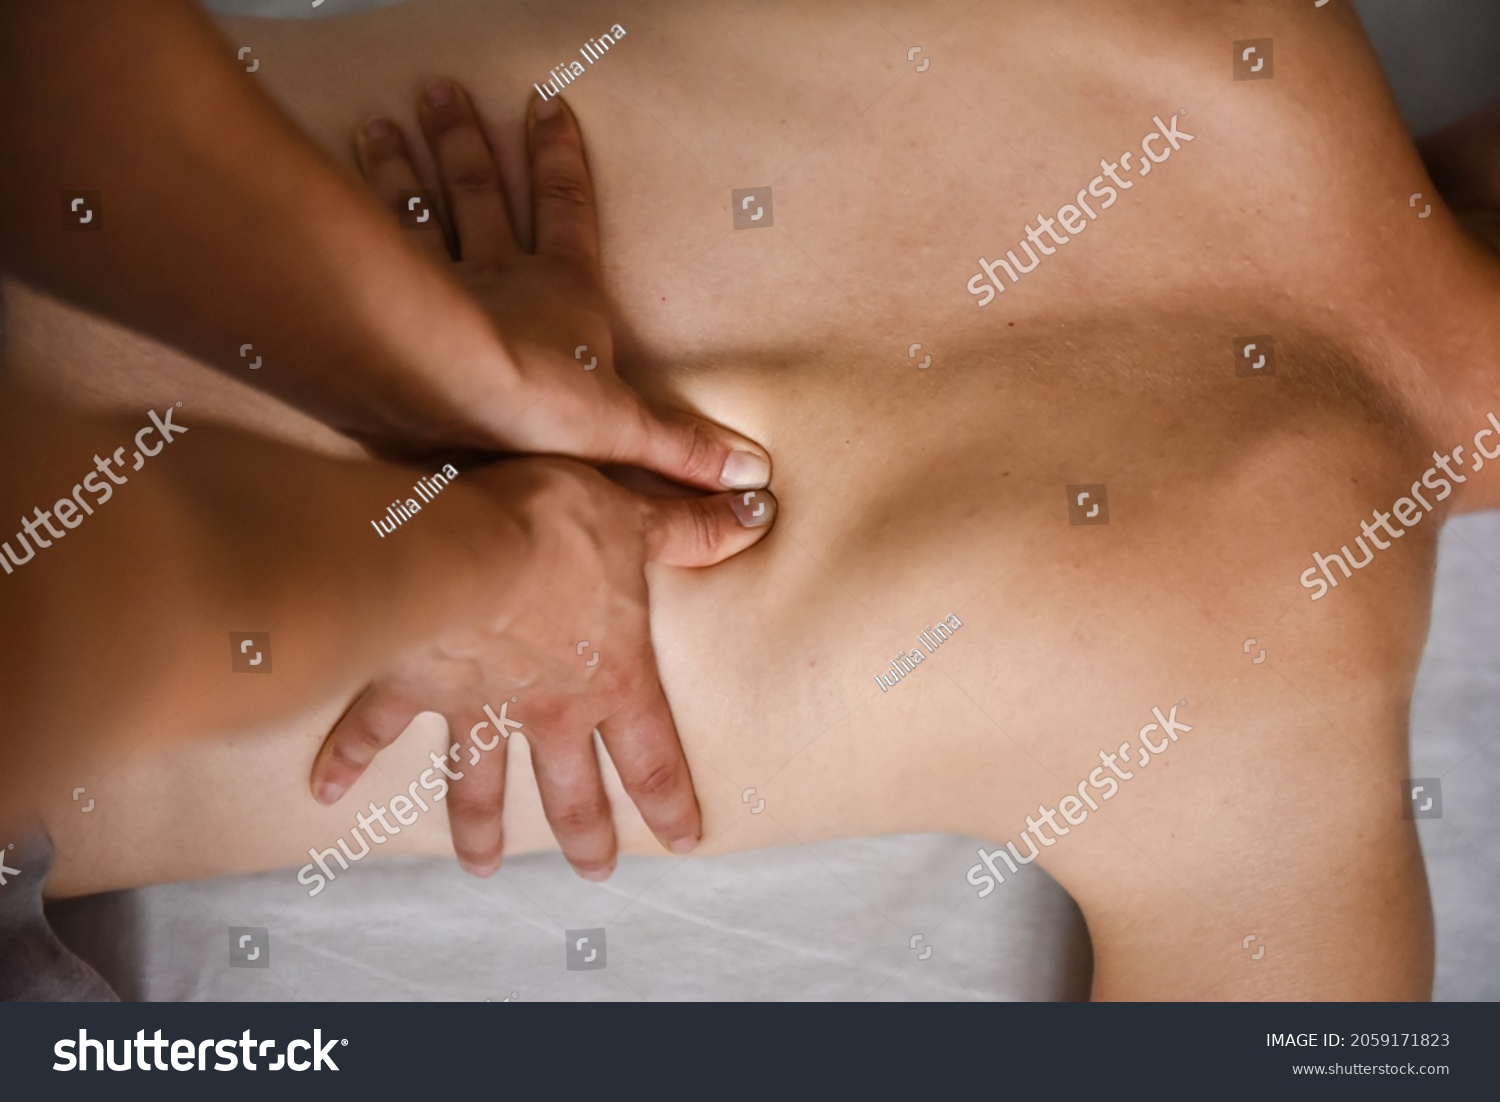 Female energy massage shiatsu relaxing and care treatment for body and mindfull health gentle woman arms doing back close up #2059171823